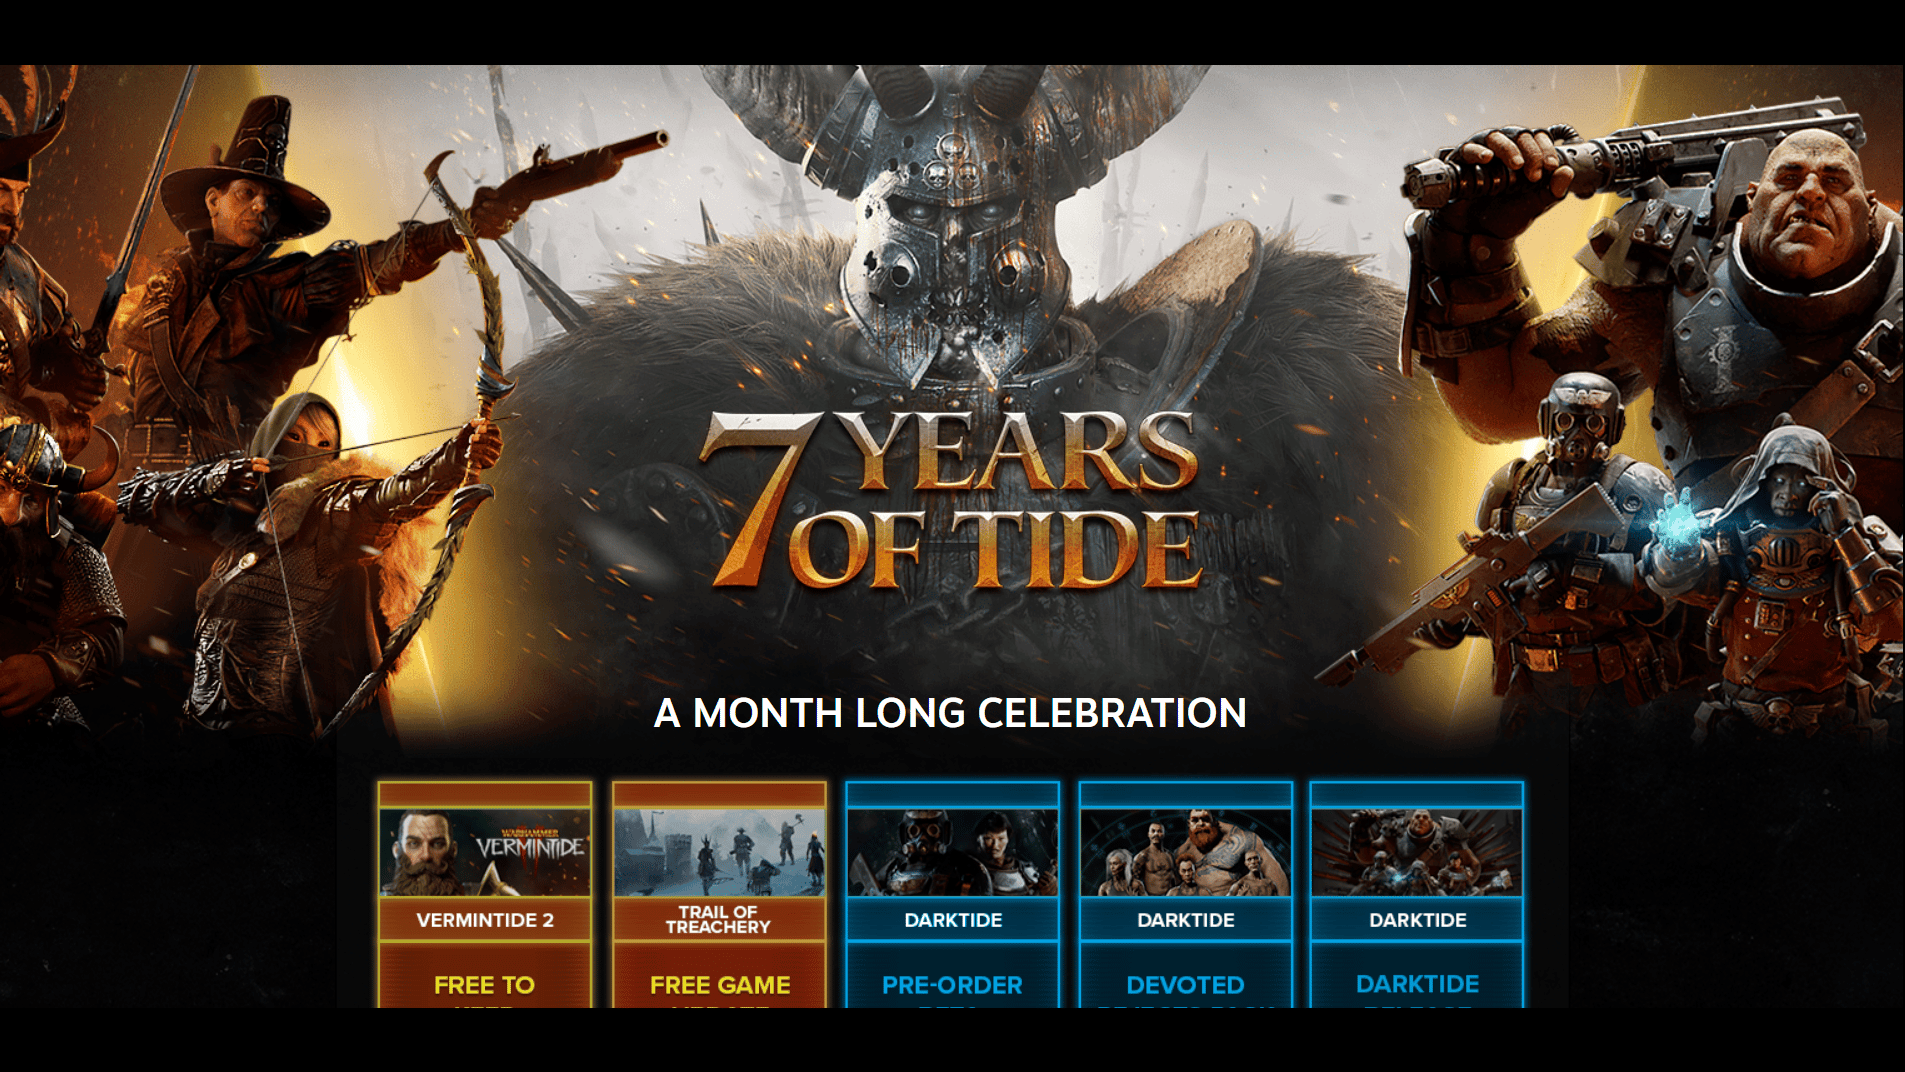 Fatshark has an exciting month planned in celebration of 7 years of Vermintide.